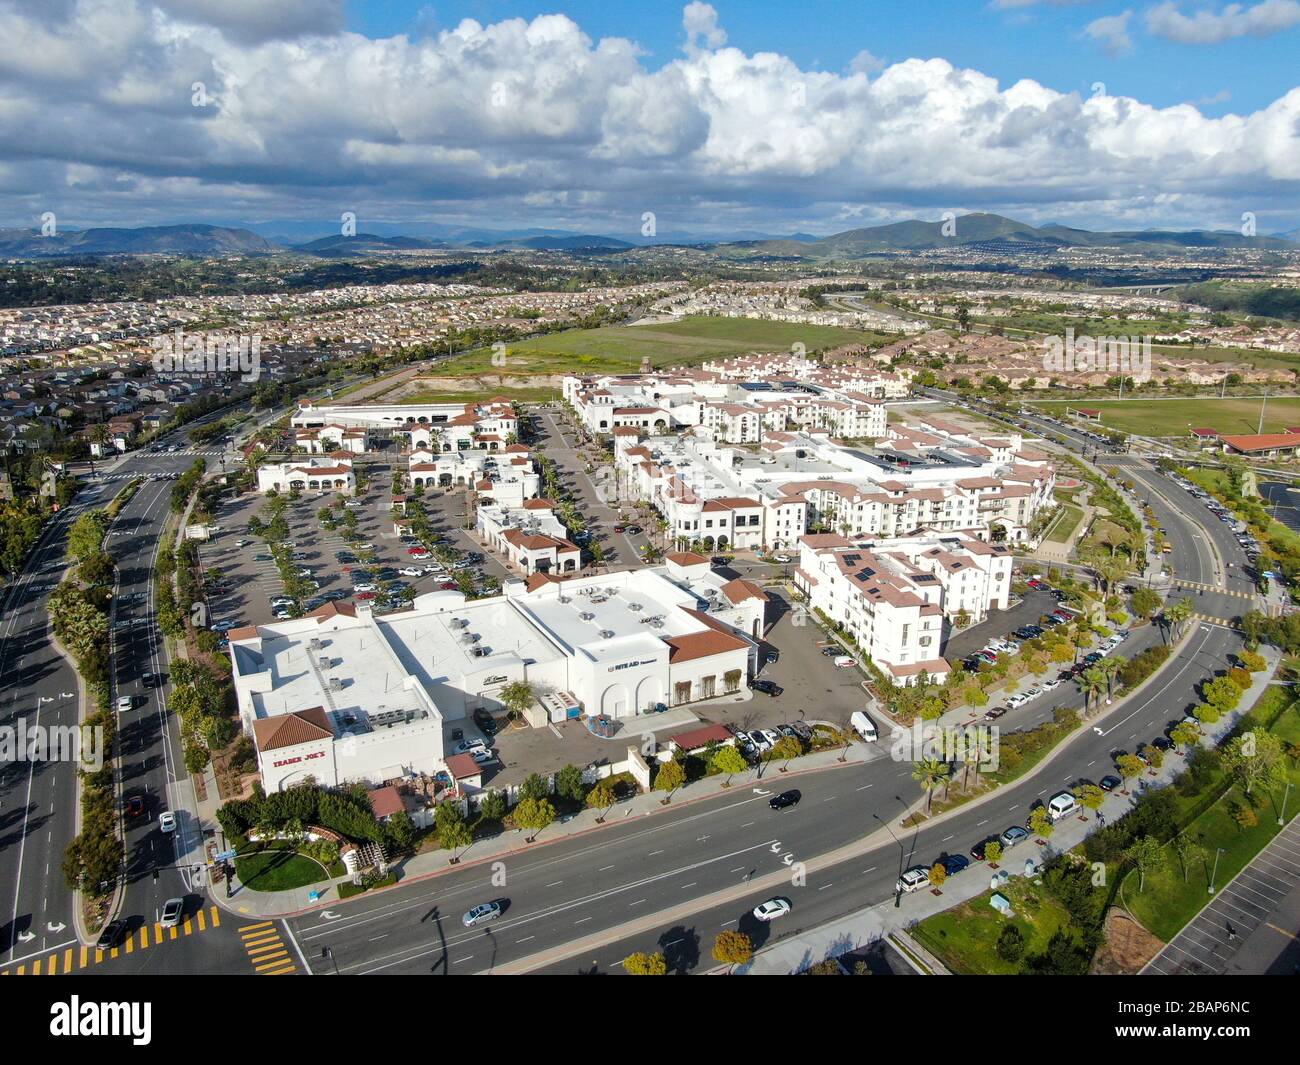 Aerial view of typical small town shopping center with parking . Carmel Valley, San Diego, California, USA. March 28th, 2020 Stock Photo